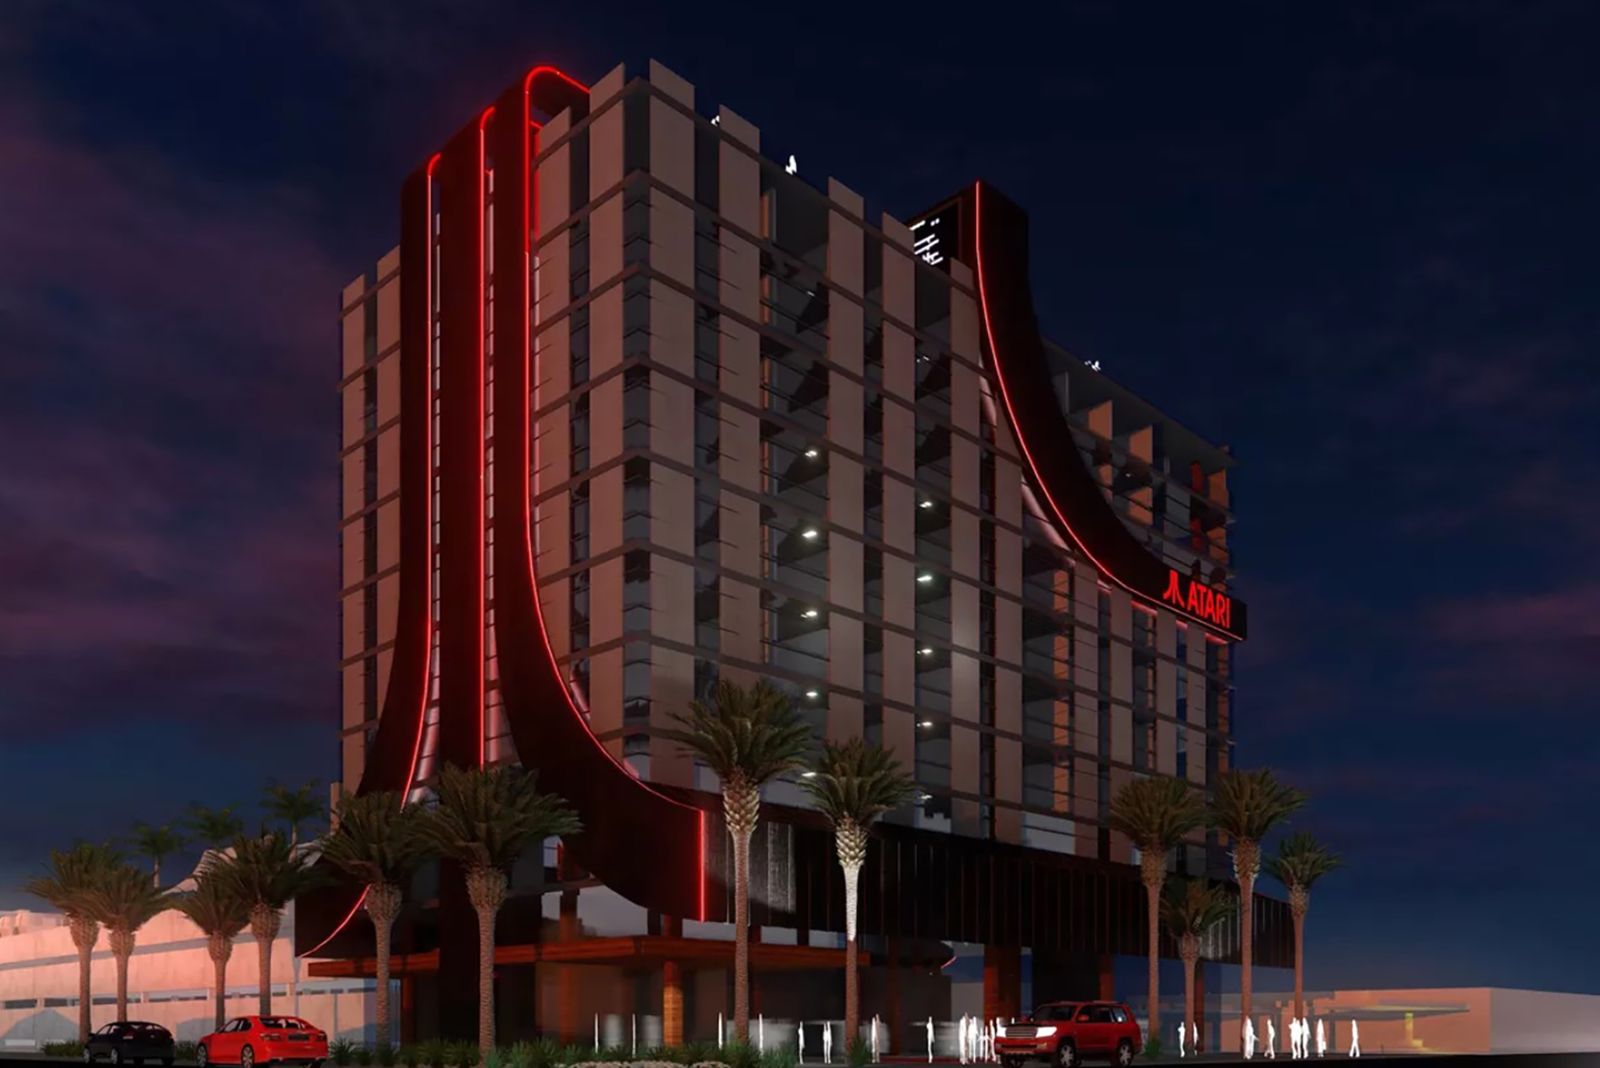 Atari-branded hotels for nostalgic gamers are coming to the US image 1